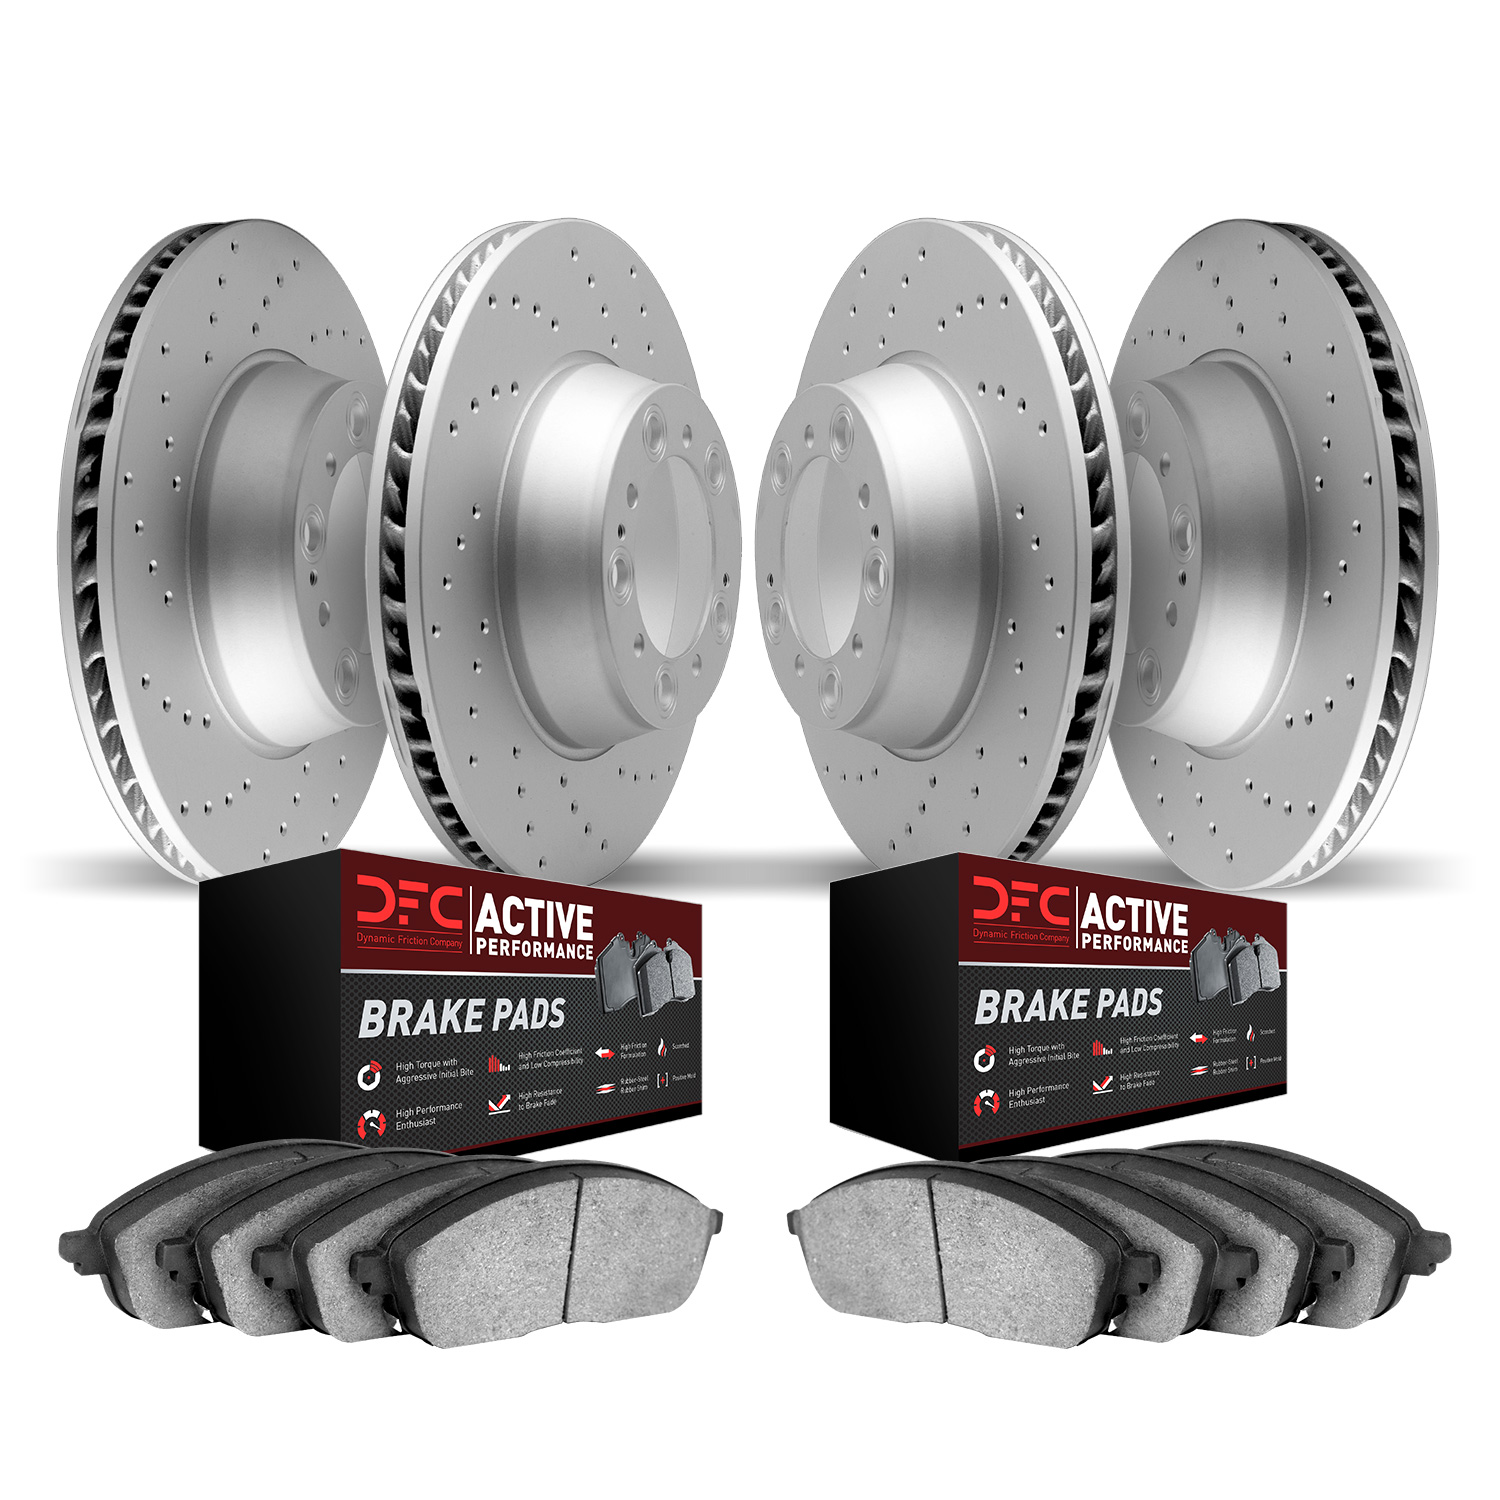 2704-31098 Geoperformance Drilled Brake Rotors with Active Performance Pads Kit, 2012-2021 BMW, Position: Front and Rear